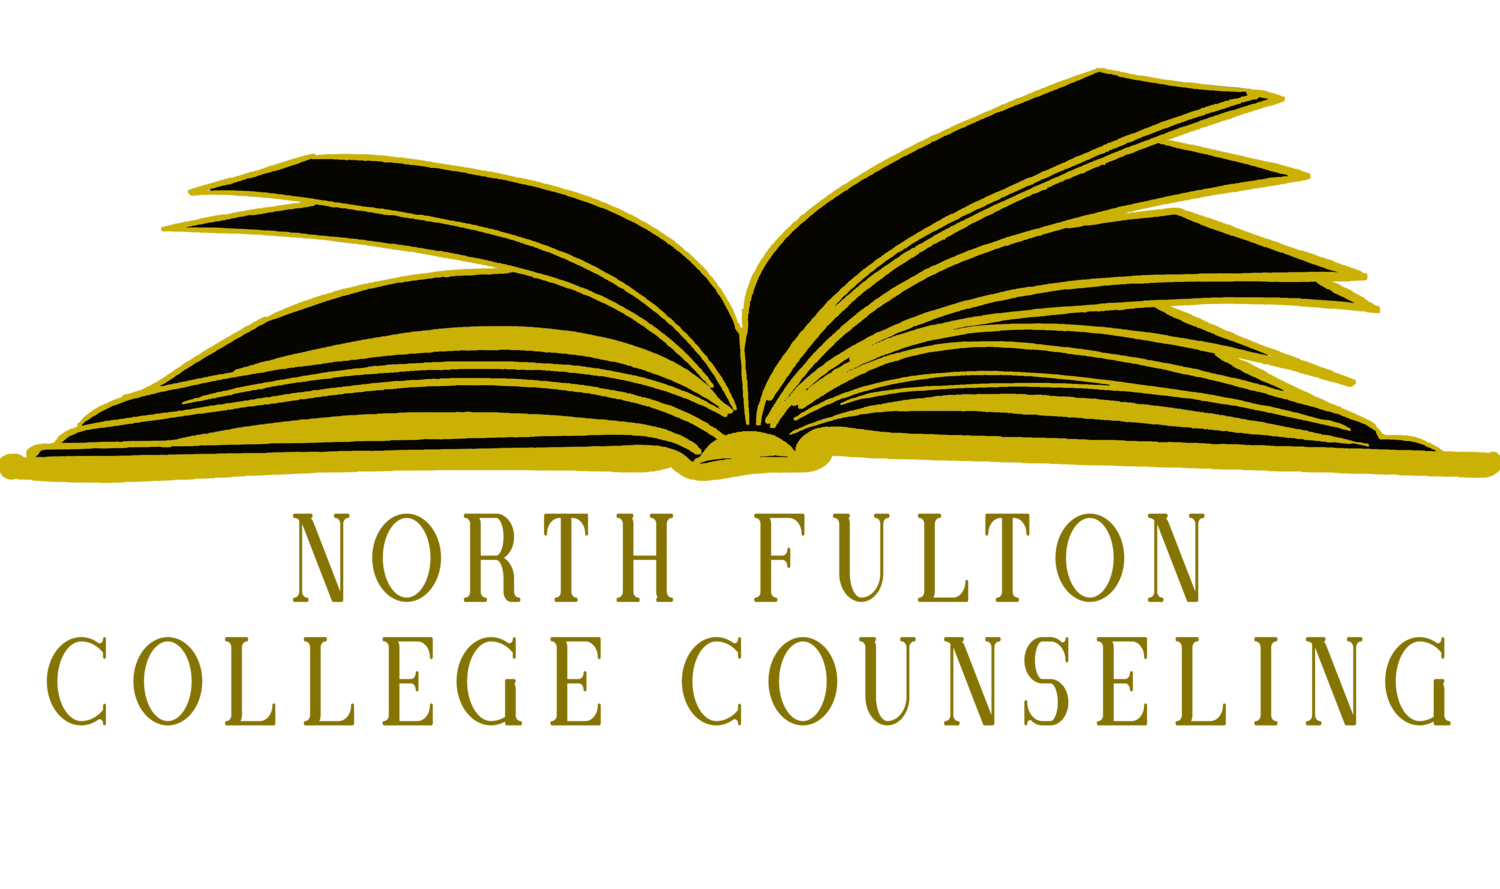 North Fulton College Counseling